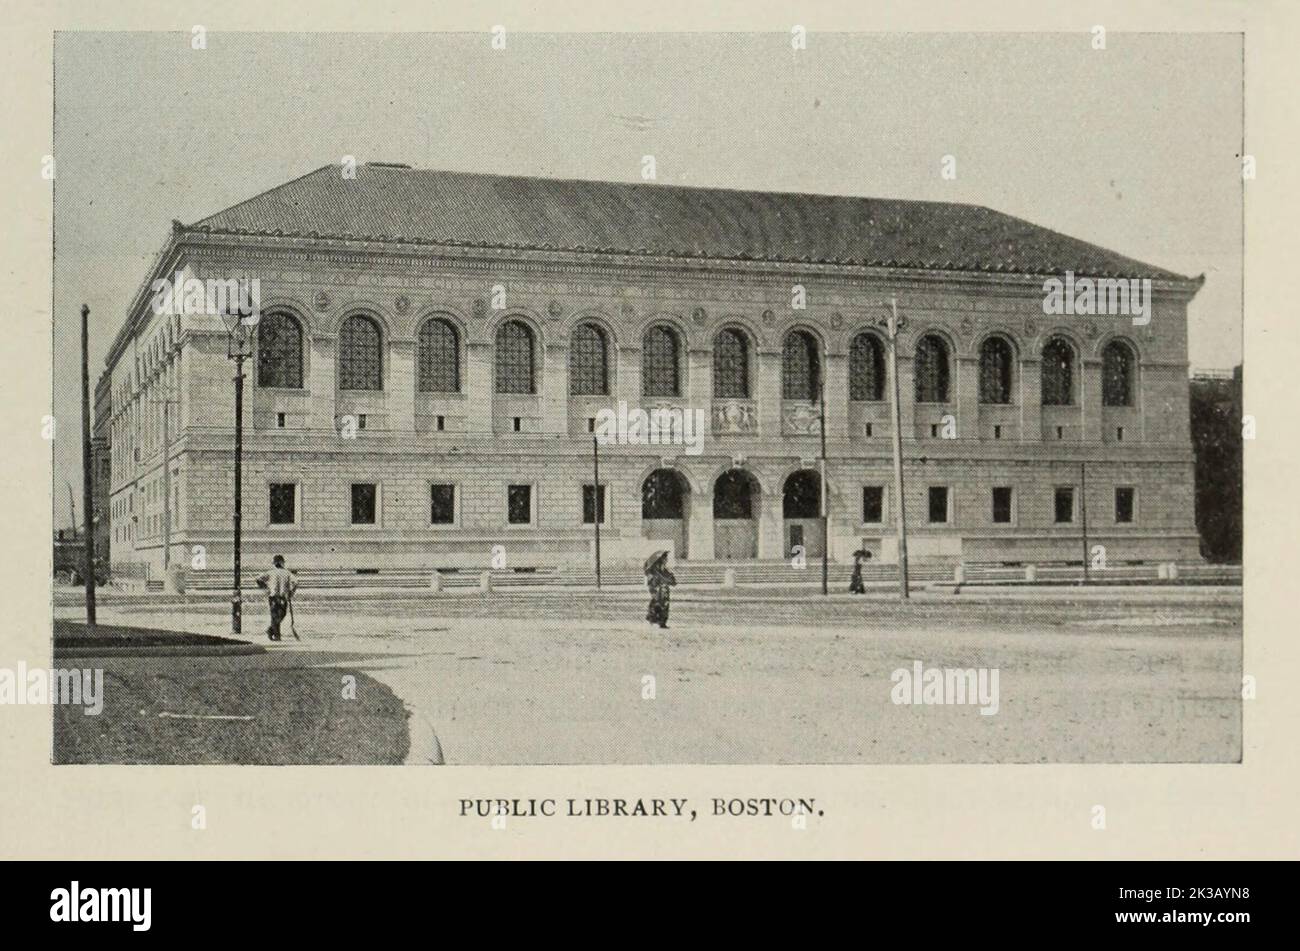 Public Library, Boston from the Article THE ARCHITECTURE OF MUNICIPAL BUILDINGS. By E. C. Gardner from The Engineering Magazine DEVOTED TO INDUSTRIAL PROGRESS Volume VIII April to September, 1895 NEW YORK The Engineering Magazine Co Stock Photo